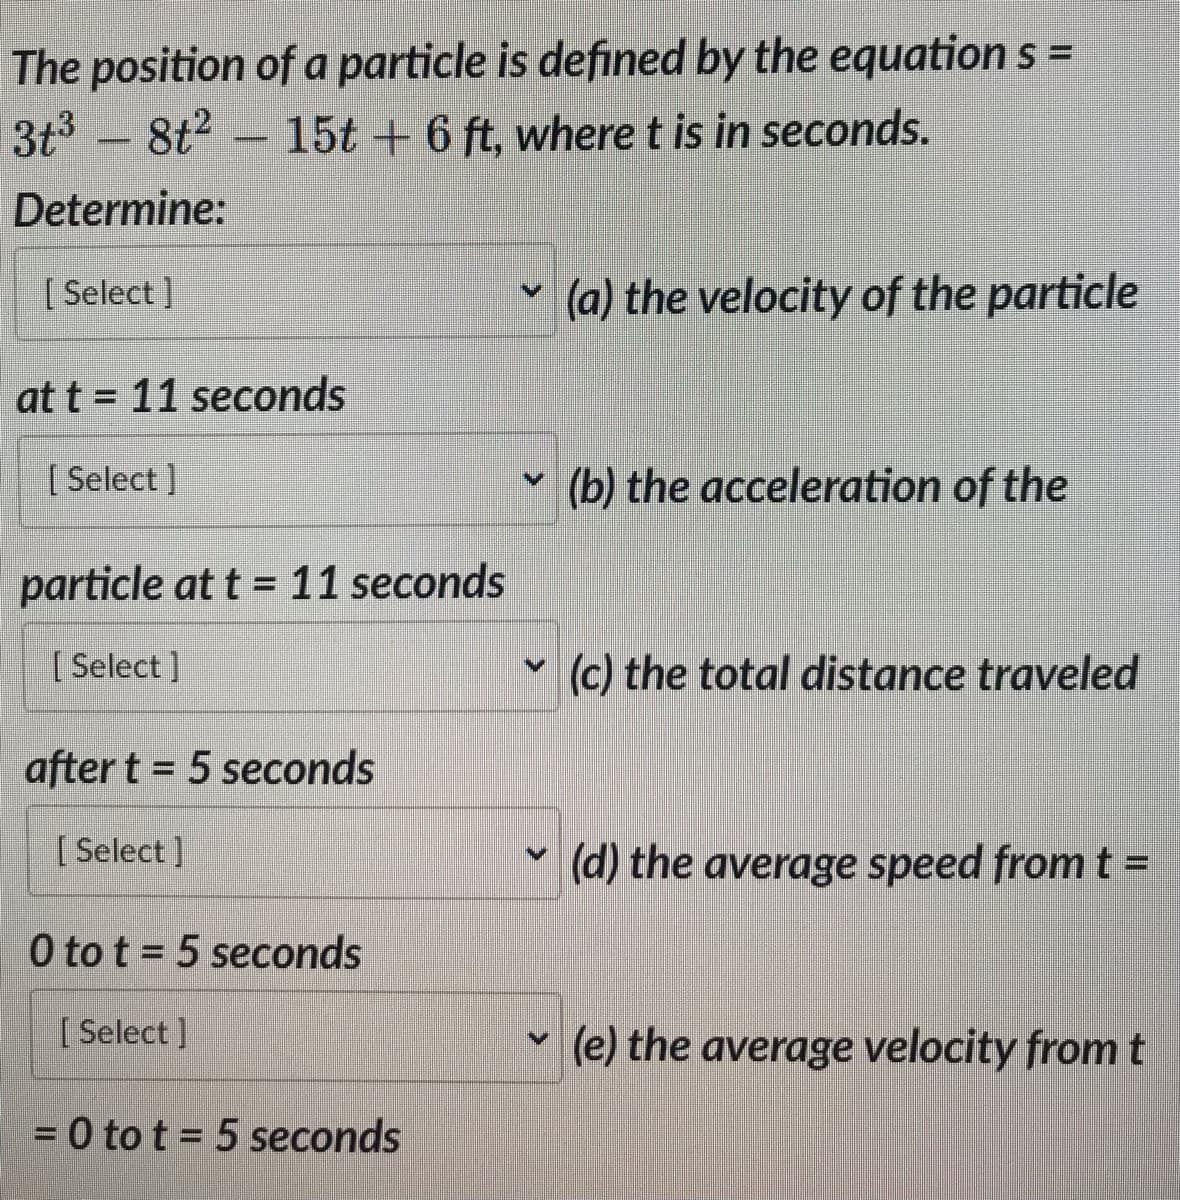 The position of a particle is defined by the equation s =
3t³8t² 15t + 6 ft, where t is in seconds.
Determine:
[Select]
at t= 11 seconds
[Select]
particle at t = 11 seconds
[Select]
after t = 5 seconds
[ Select]
0 to t = 5 seconds
[Select]
= 0 to t = 5 seconds
V
V
>
V
(a) the velocity of the particle
(b) the acceleration of the
(c) the total distance traveled
(d) the average speed from t =
(e) the average velocity from t